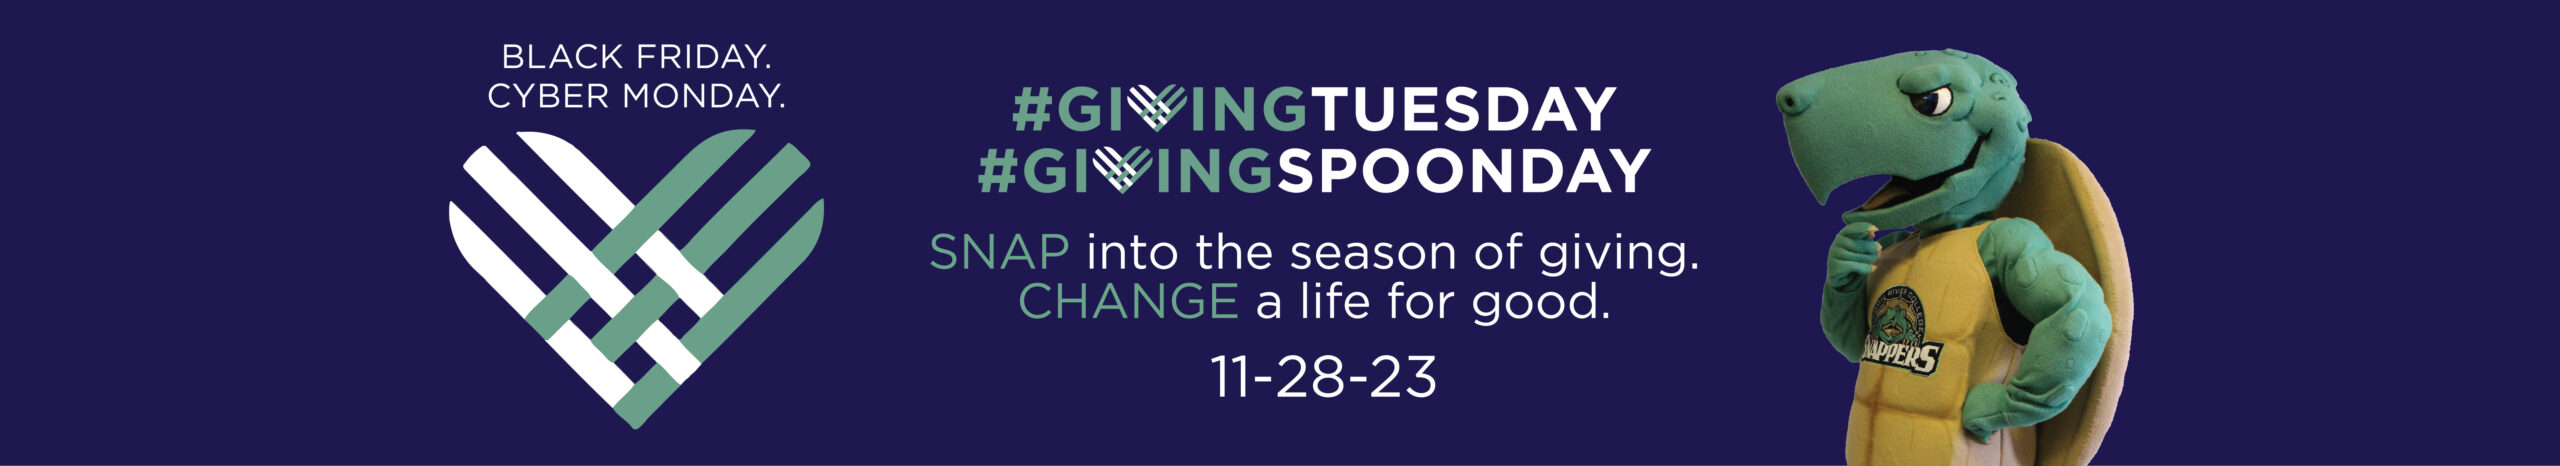 (Black Friday, Cyber monday) Giving Tuesday Giving Spoonday, Snap into the season of giving. Change a life for good 11-28-23; with an image of Sheldon, the Snappers mascot.